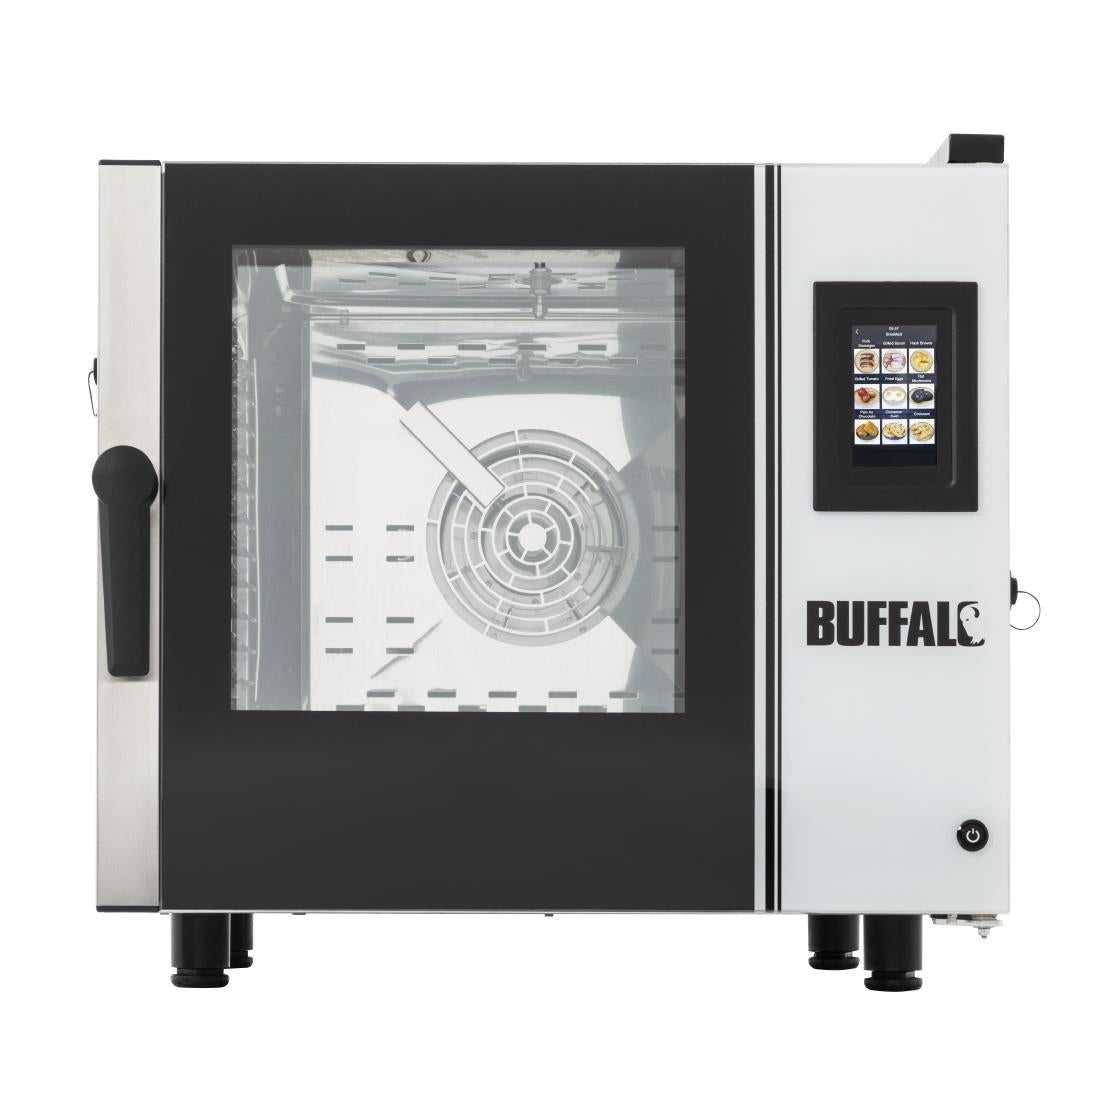 SA772 Buffalo Freestanding Smart Touchscreen Compact Combi Oven  6 x GN 1/1 with Installation Kit